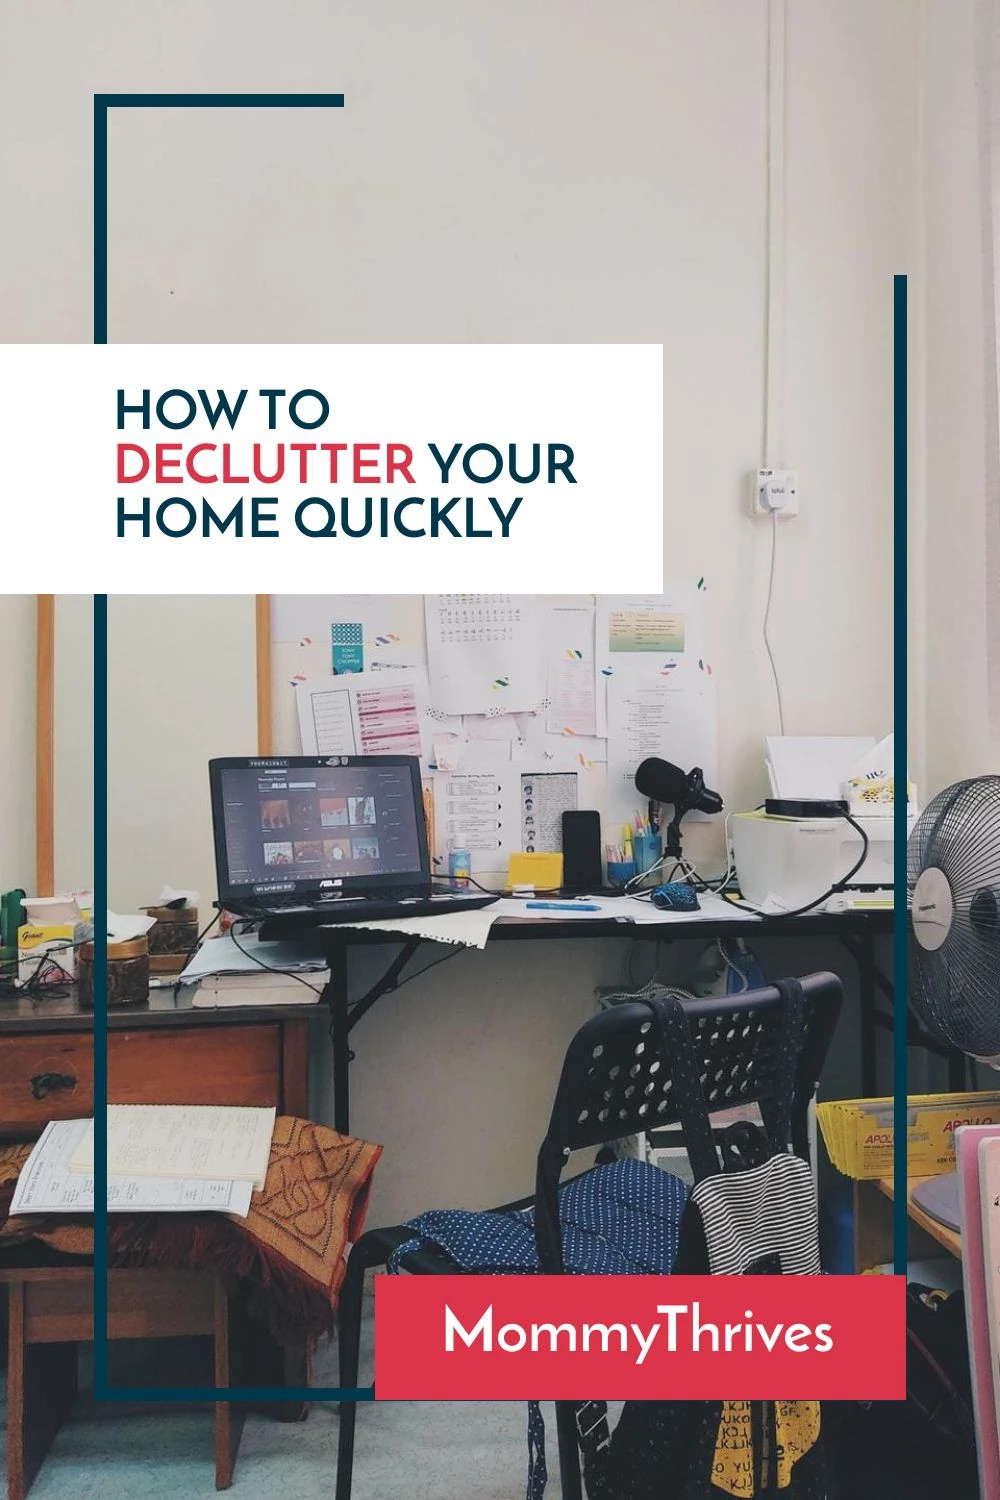 Declutter and Organize Ideas - Declutter Ideas When Feeling Overwhelmed - How To Declutter Your Home